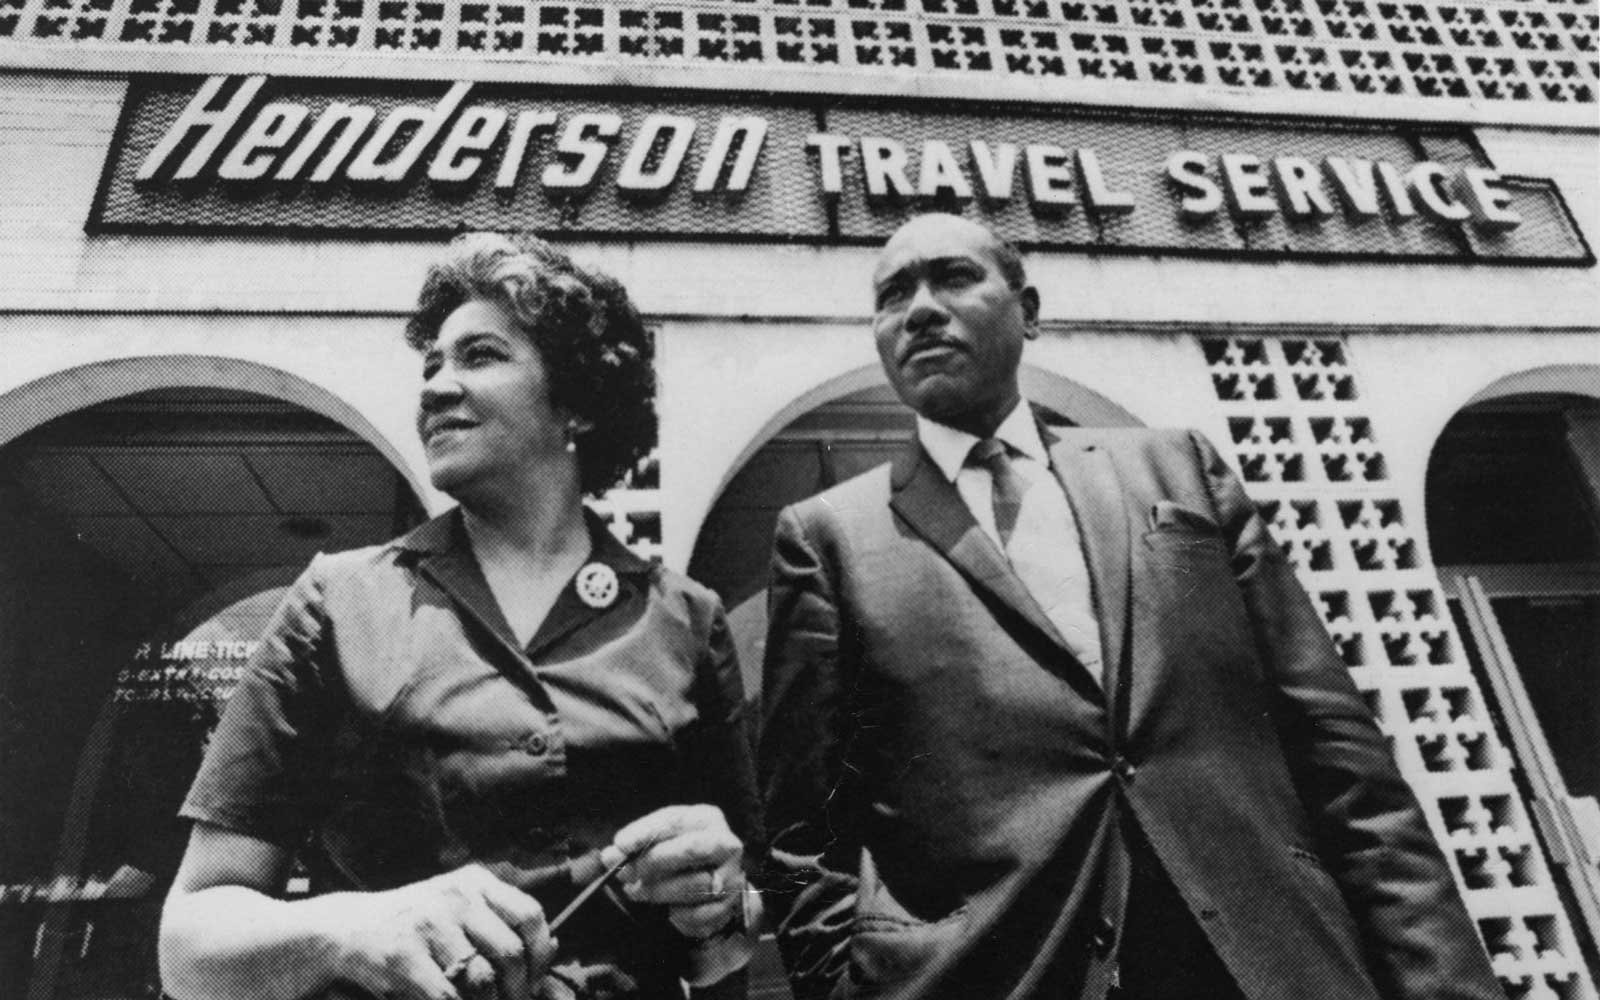 After 65 Years, the First African-American-owned Travel Agency Continues to Provide Travelers With Unique Experiences | Travel + Leisure